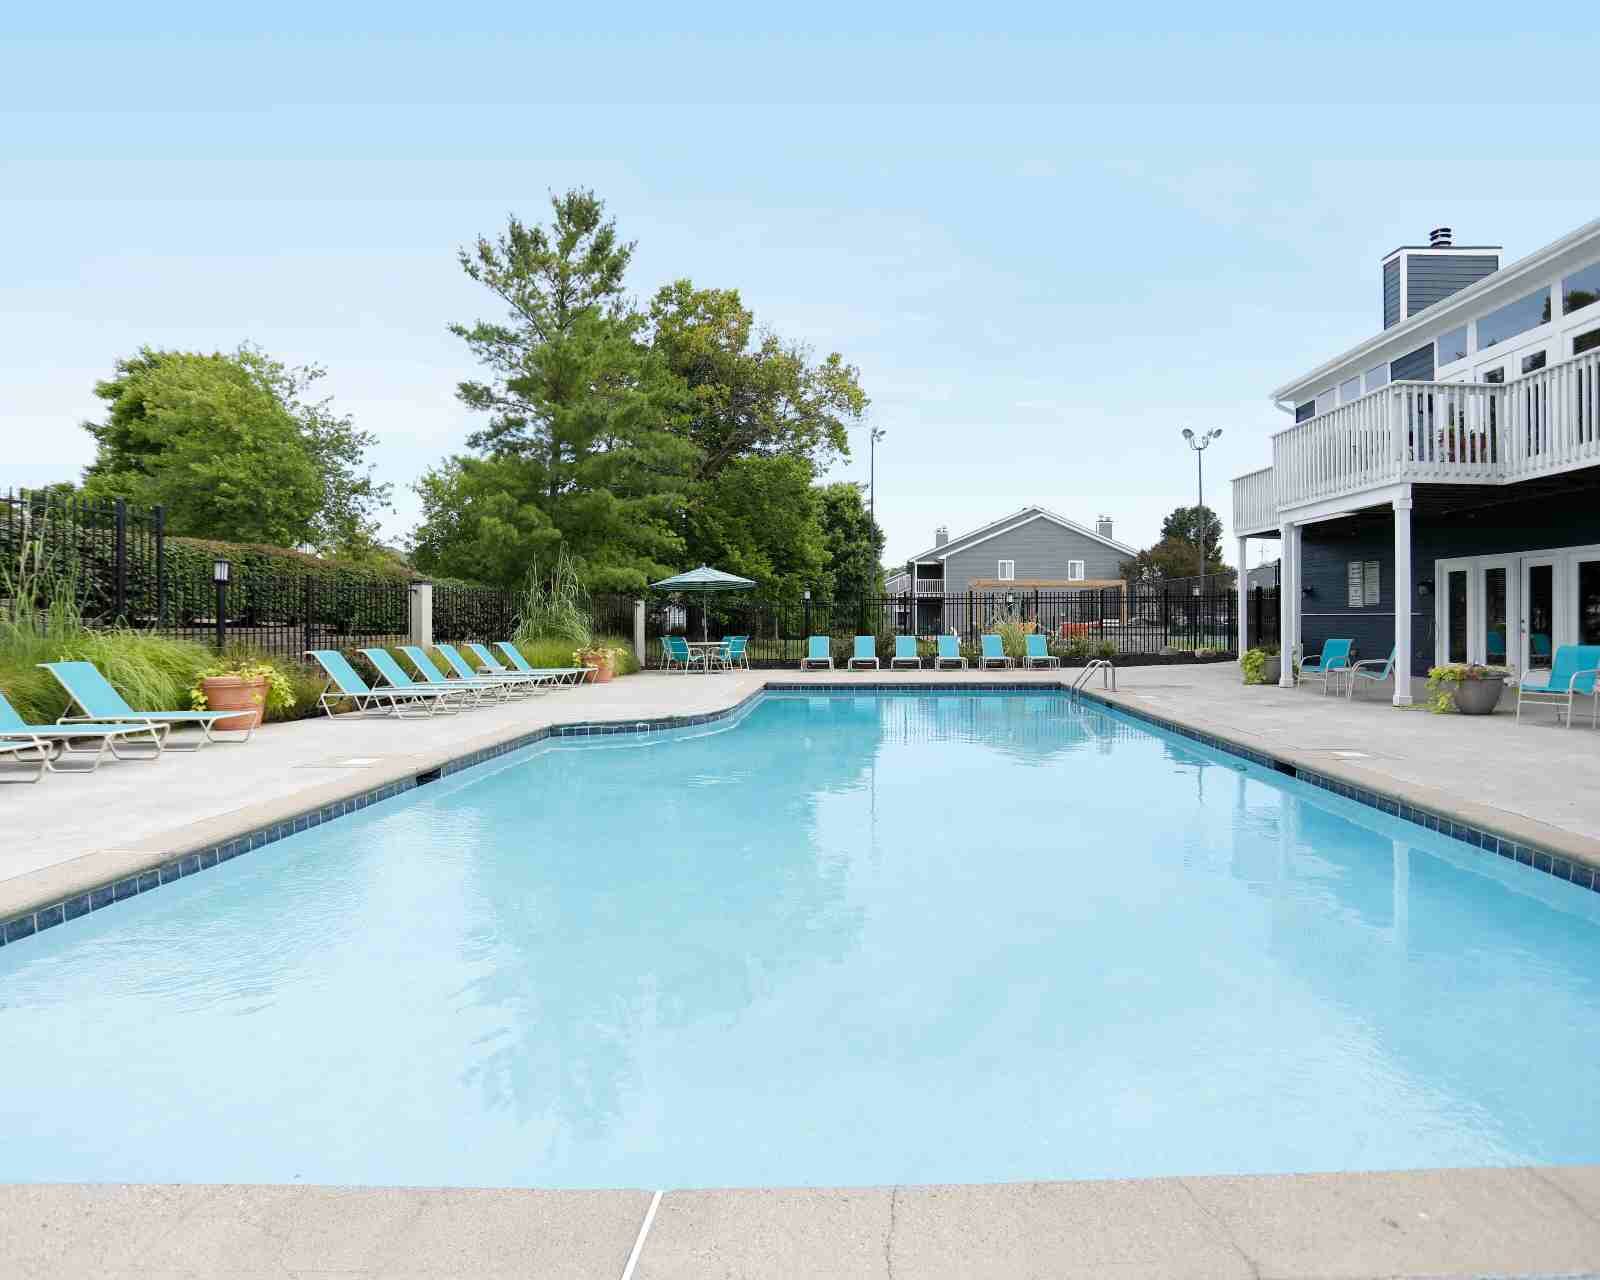 Clubhouse pool at Island Club Apartments.